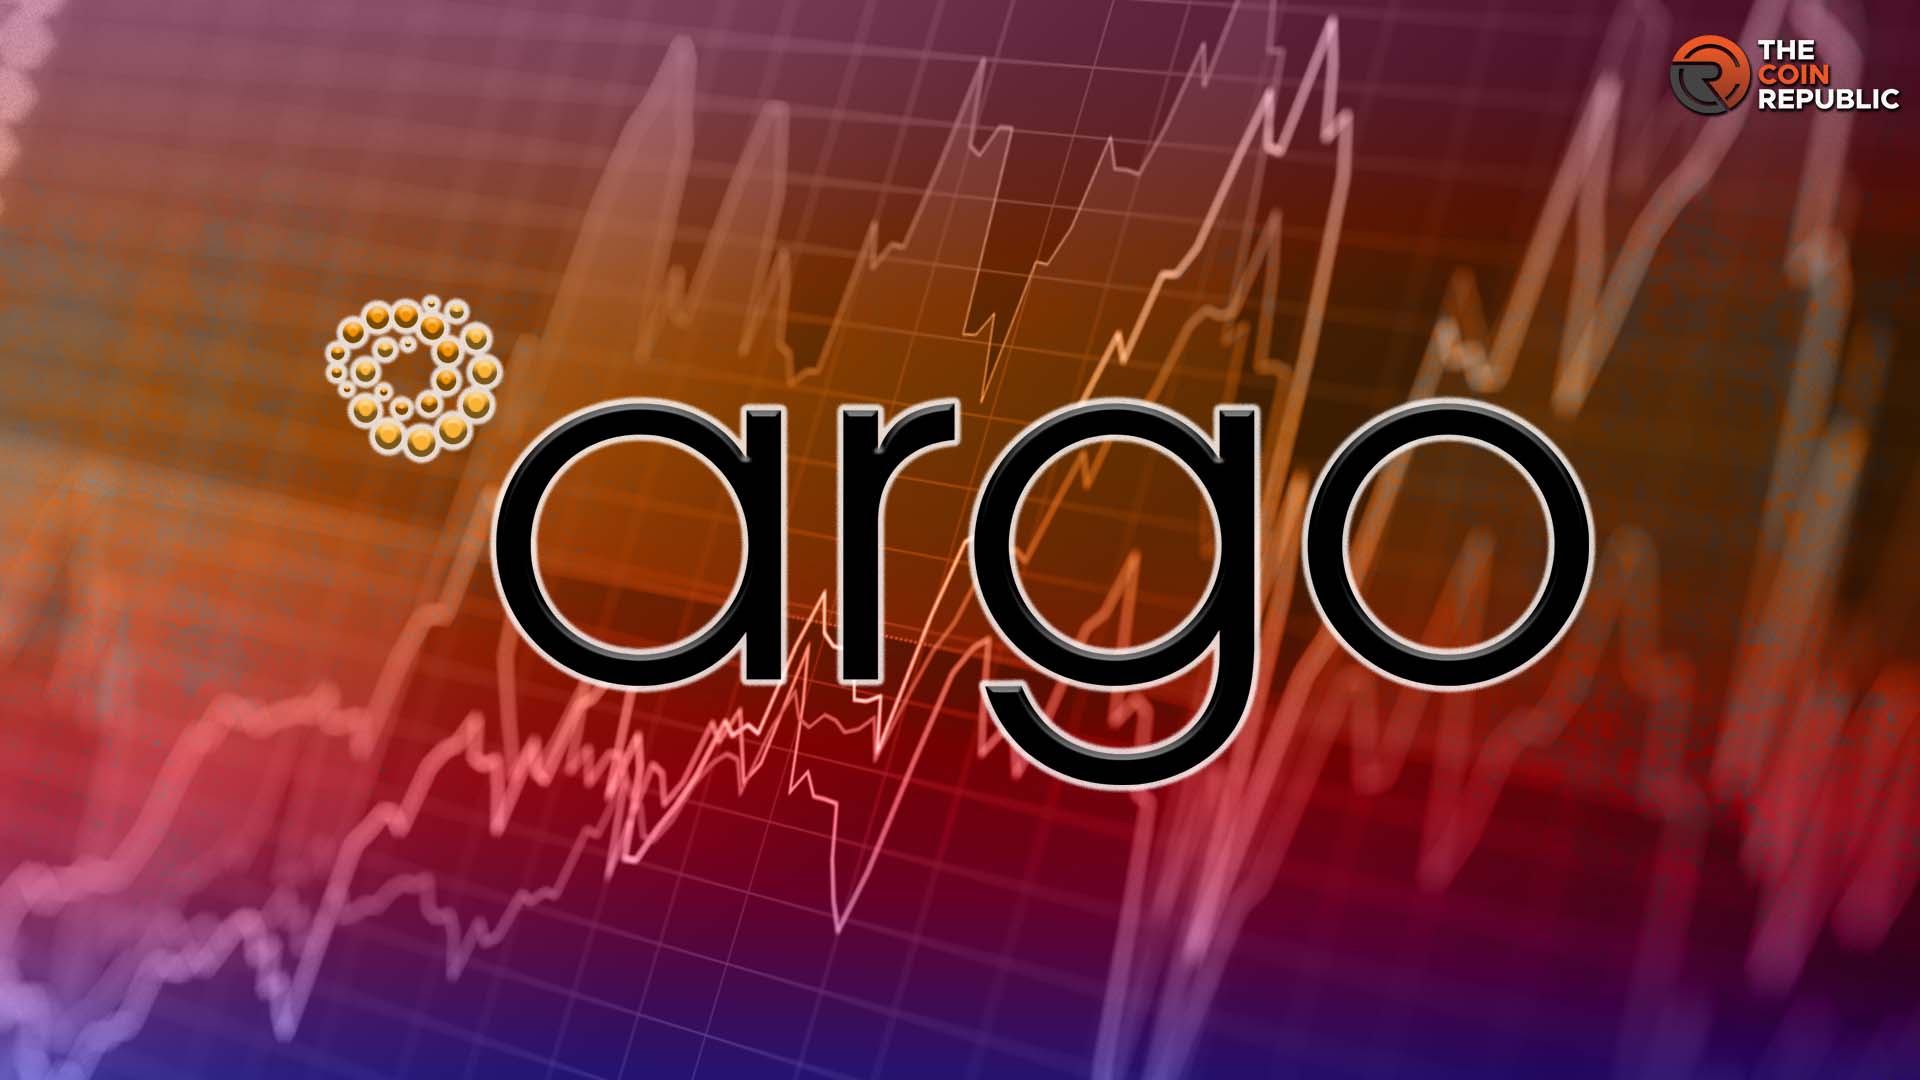 Argo Blockchain expects positive results in its first quarter earnings report